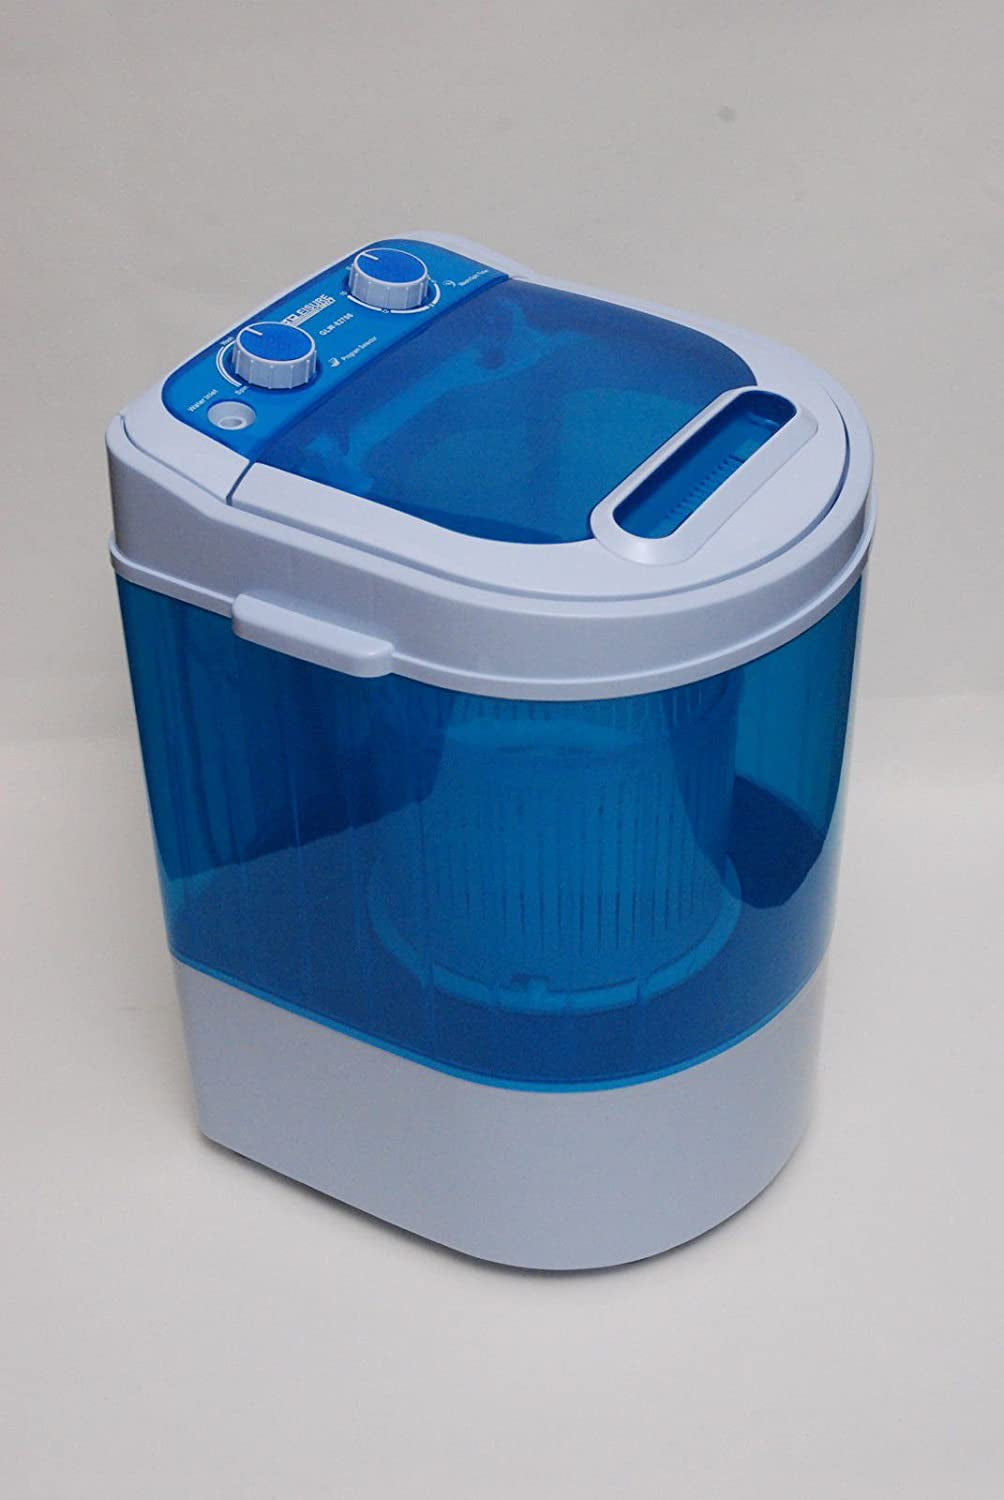 PORTABLE 230V MINI 3KG WASHING MACHINE for FLATS HOME SMALL KITCHEN with SPIN DRYER